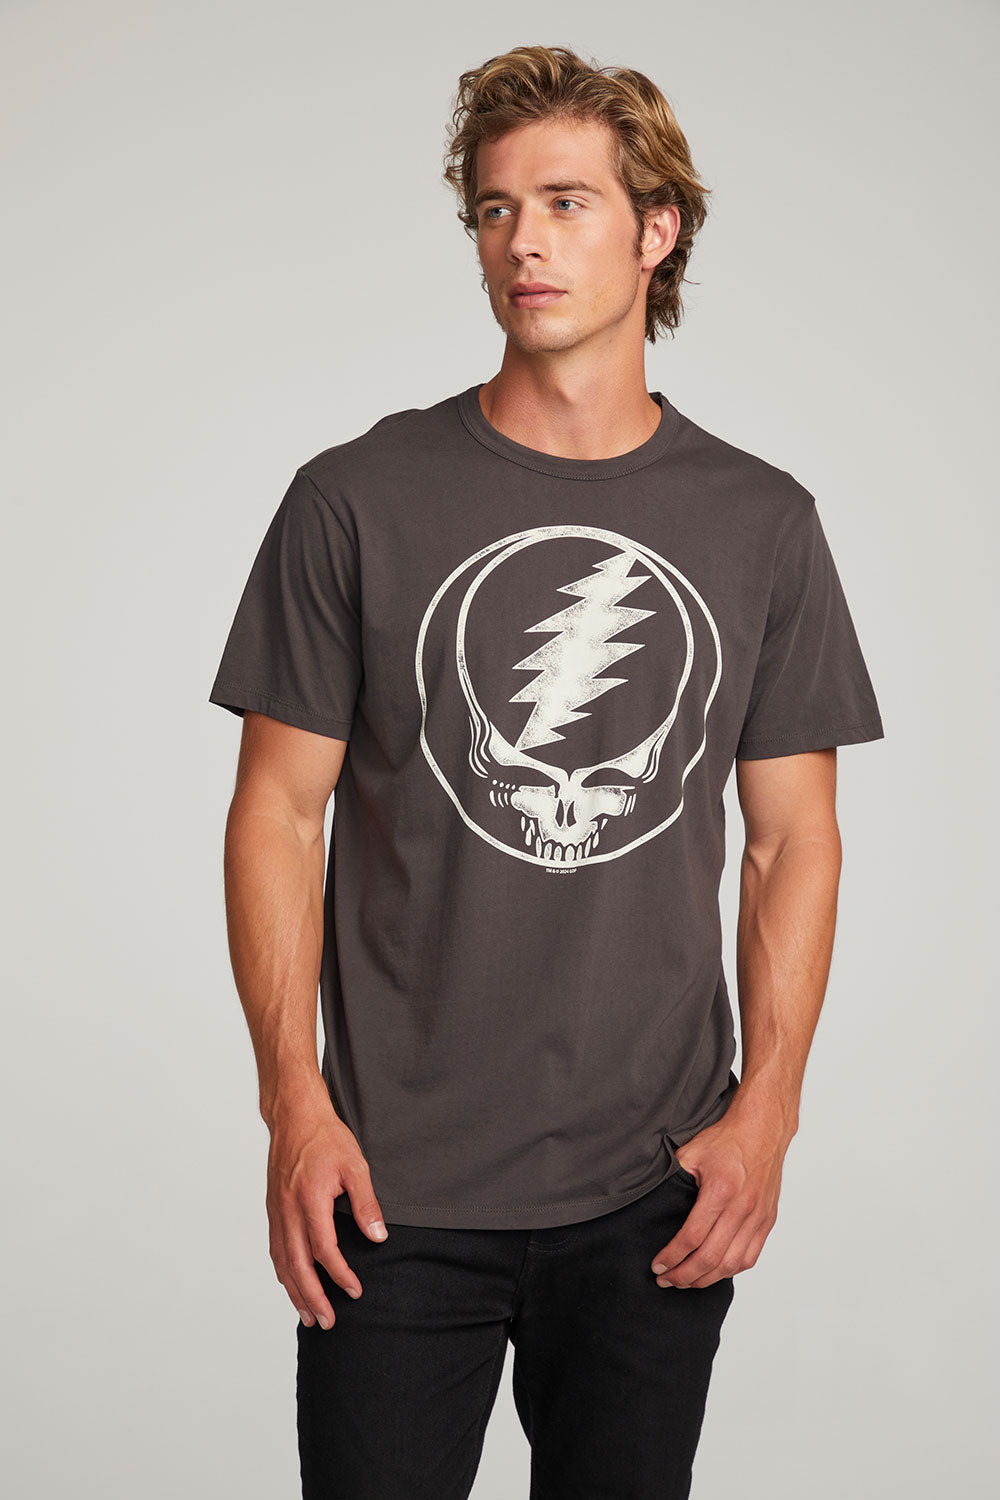 Grateful Dead Steal Your Face Mens Tee MENS chaserbrand